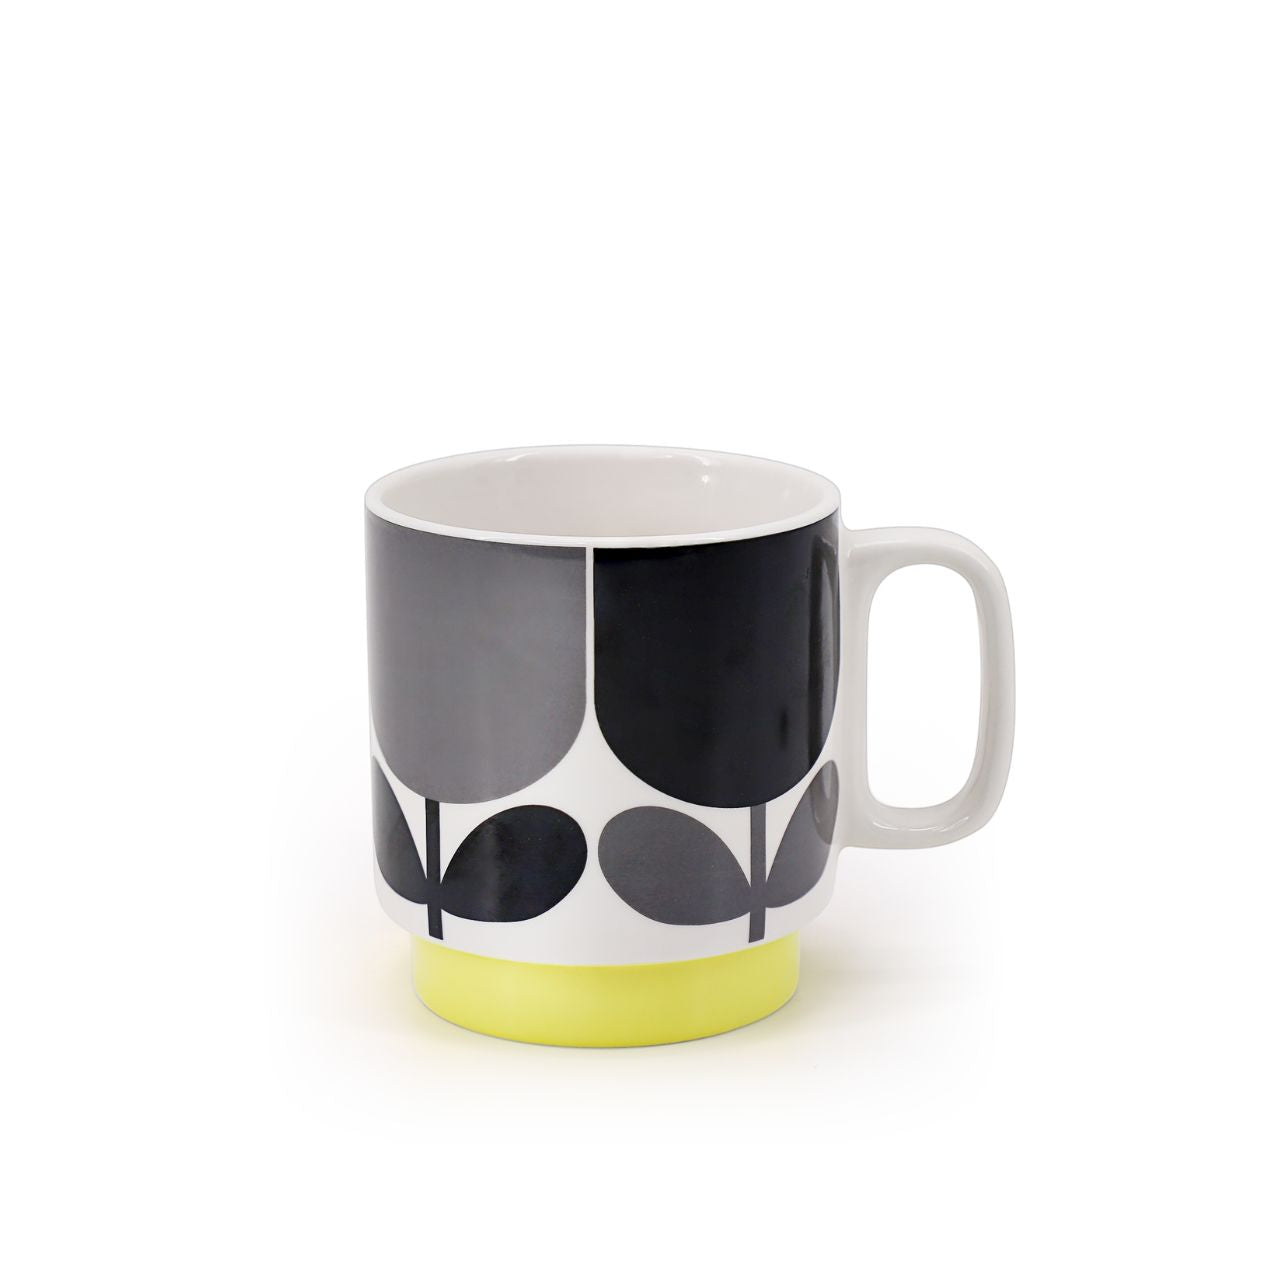 Tipperary Orla Kiely Block Flower Slate Ochre Set 2 Stacking Mugs  DESIGNED IN THE UK BY ORLA KIELY: This set of two mugs has a unique 'Block Flower' print and is designed to be stacked.  Each mug is stamped with an authentic Orla Kiely logo.